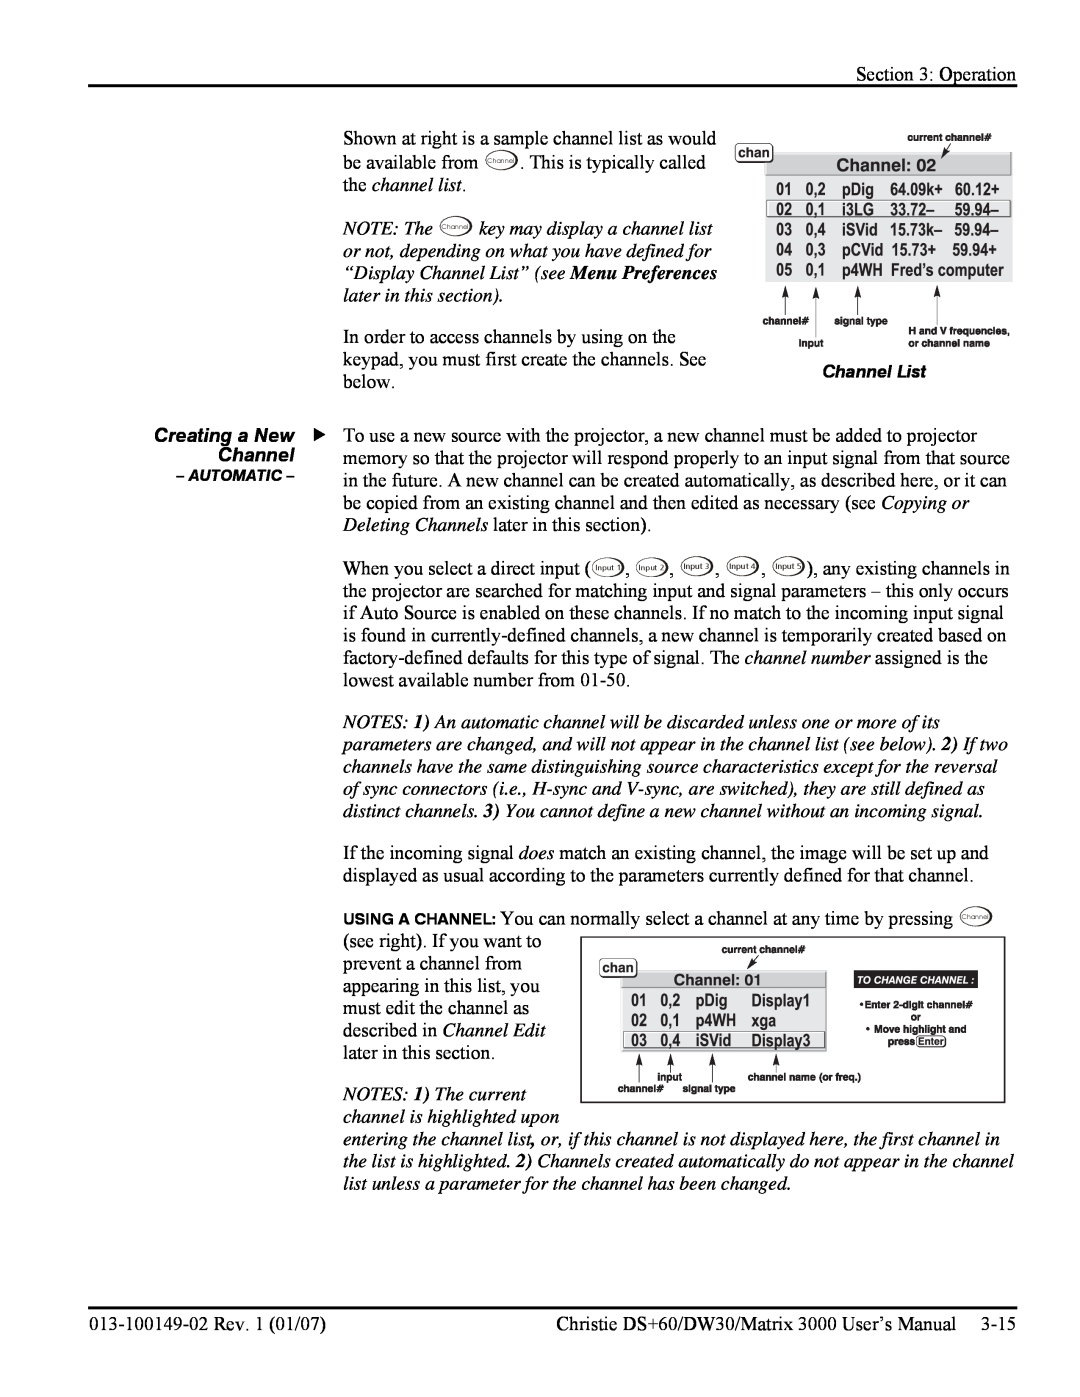 Texas Instruments MATRIX 3000, DW30 user manual Channel, NOTES 1 The current, channel is highlighted upon 